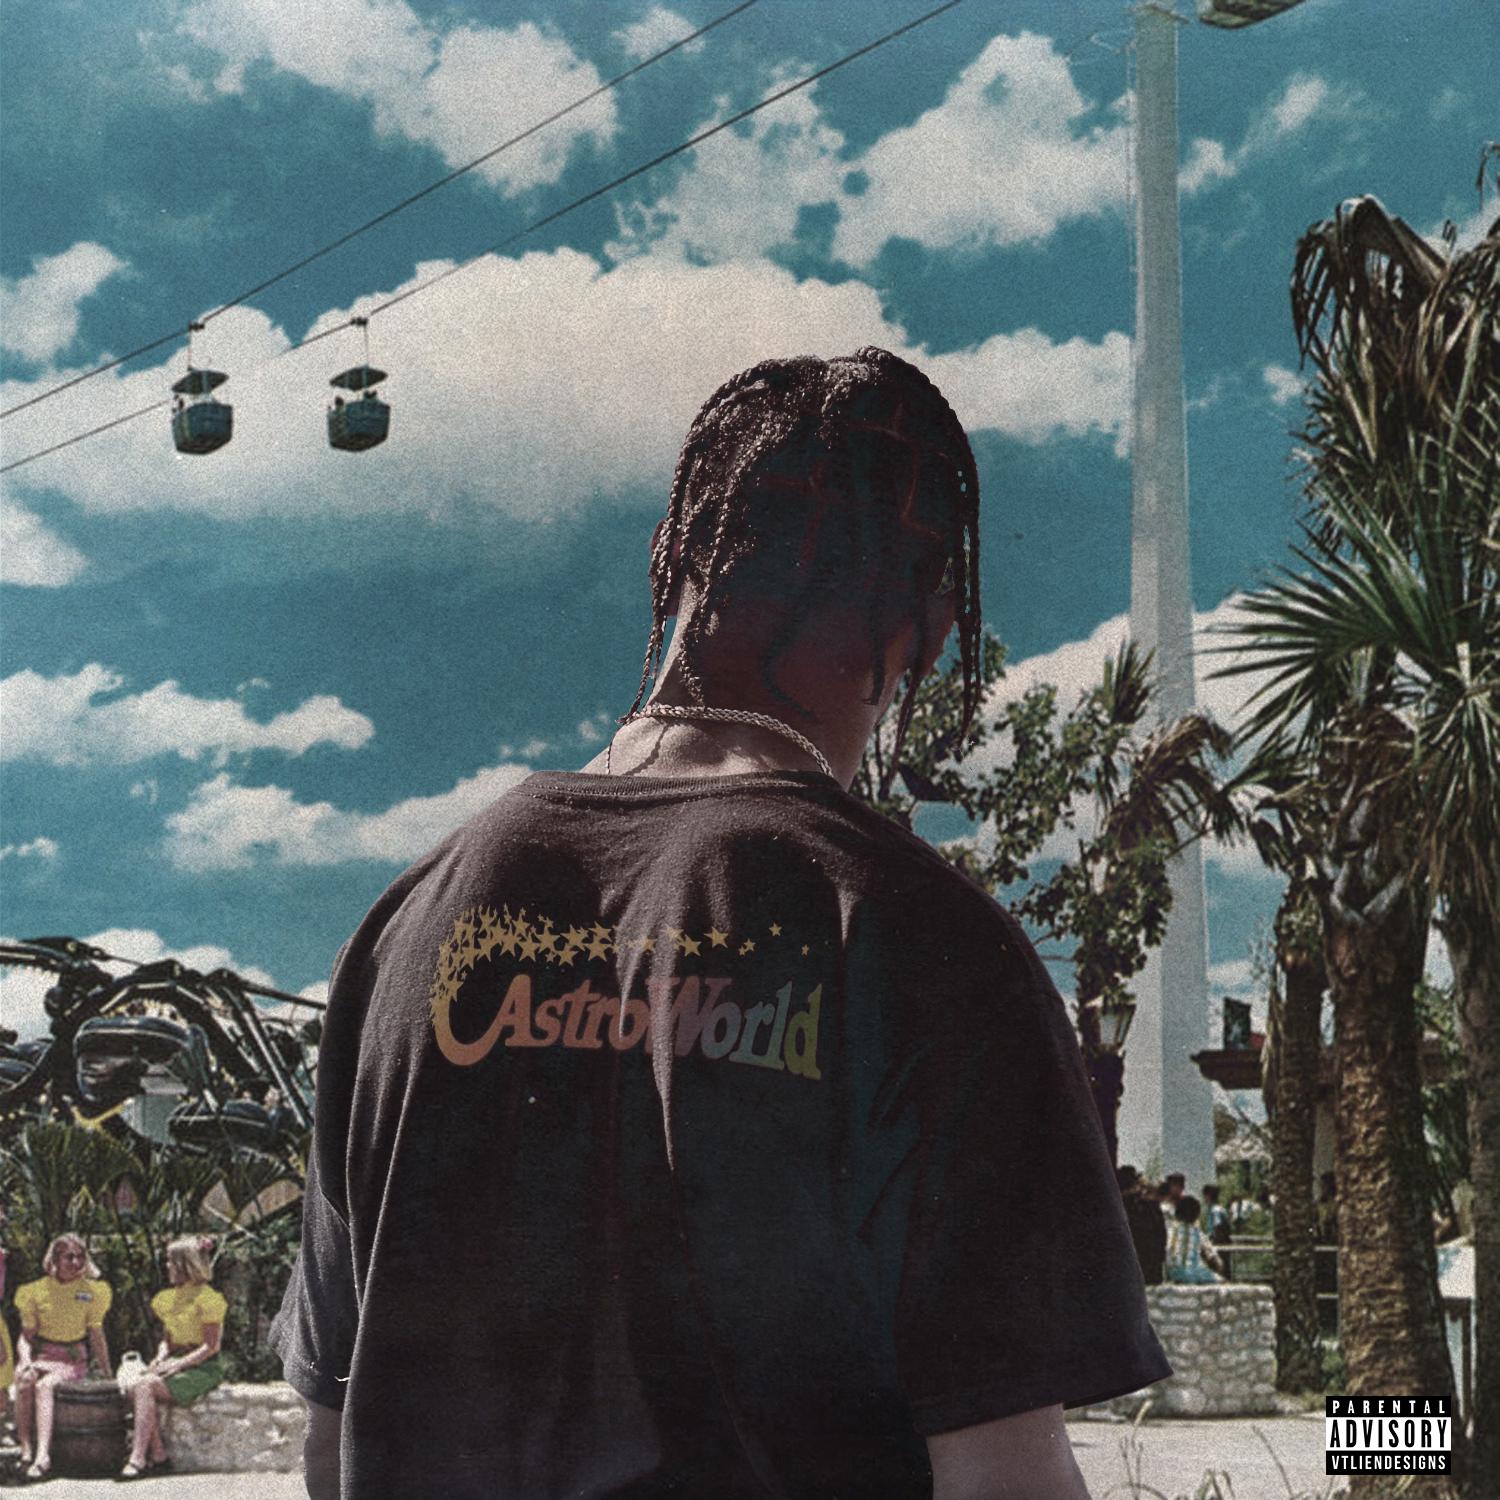 Aesthetic Travis Scott Wallpapers posted by Samantha Cunningham.